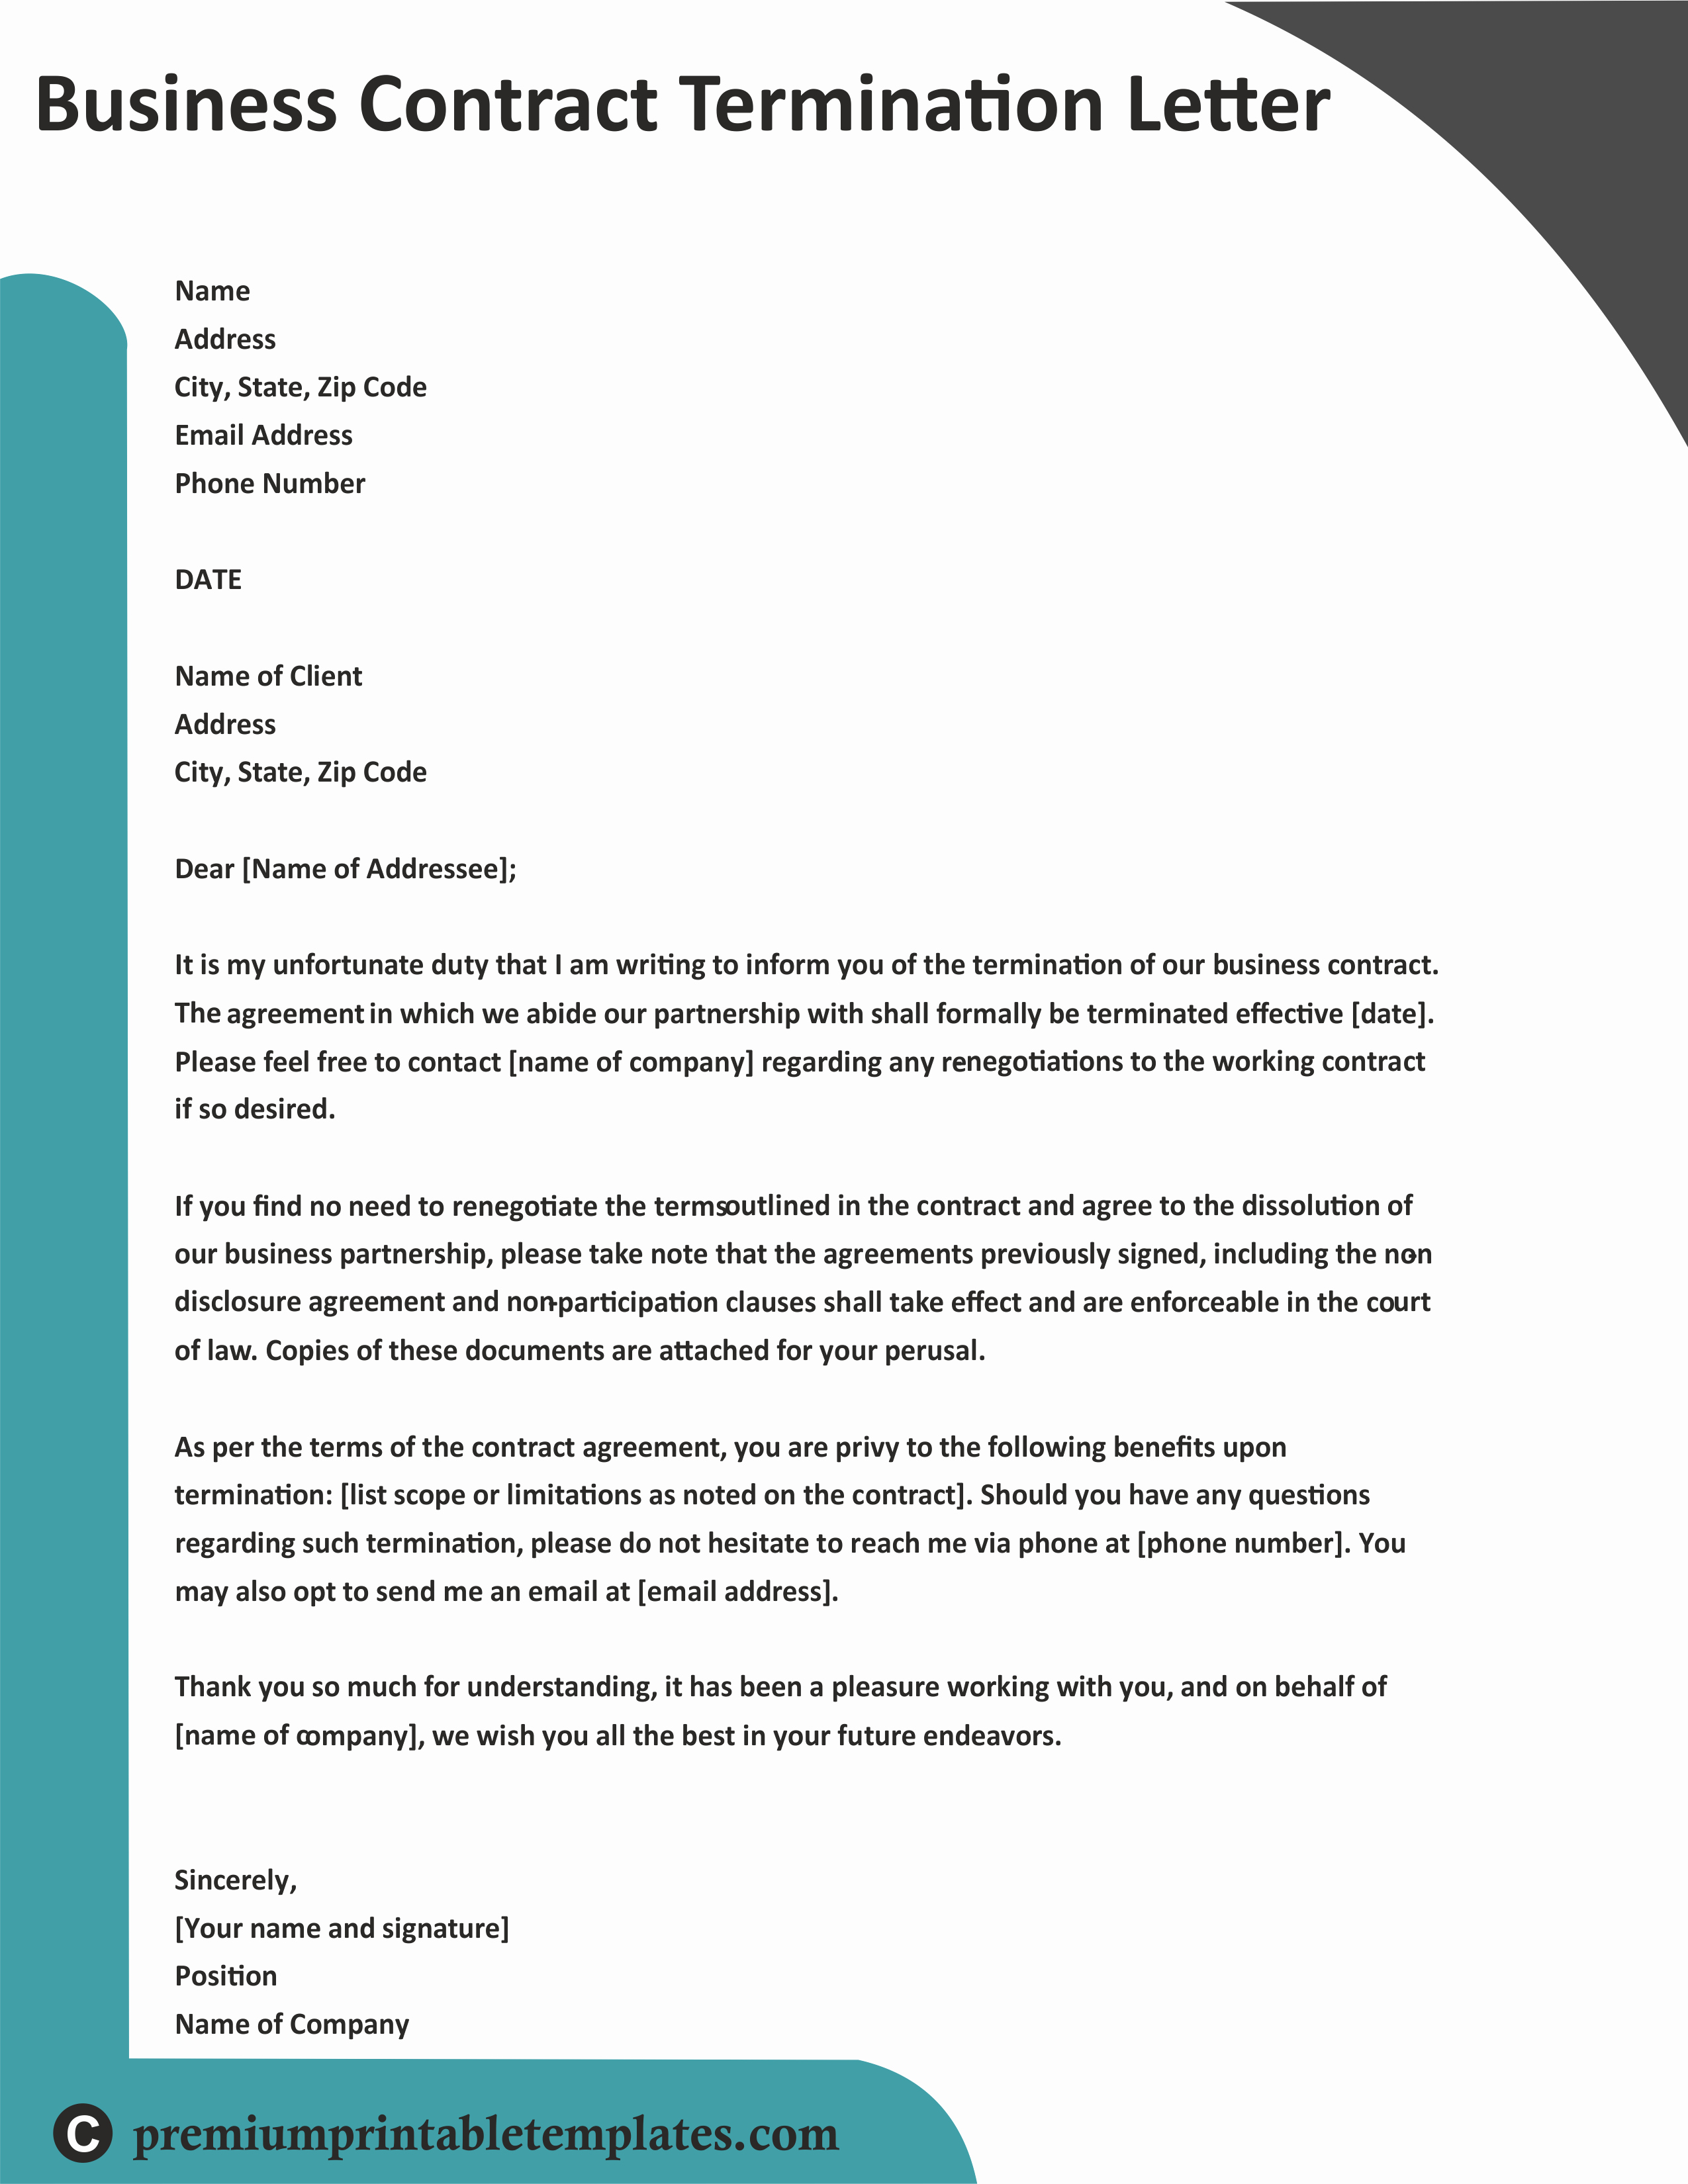 Business Contract Termination Letter Template Unique Business Contract Termination Letter